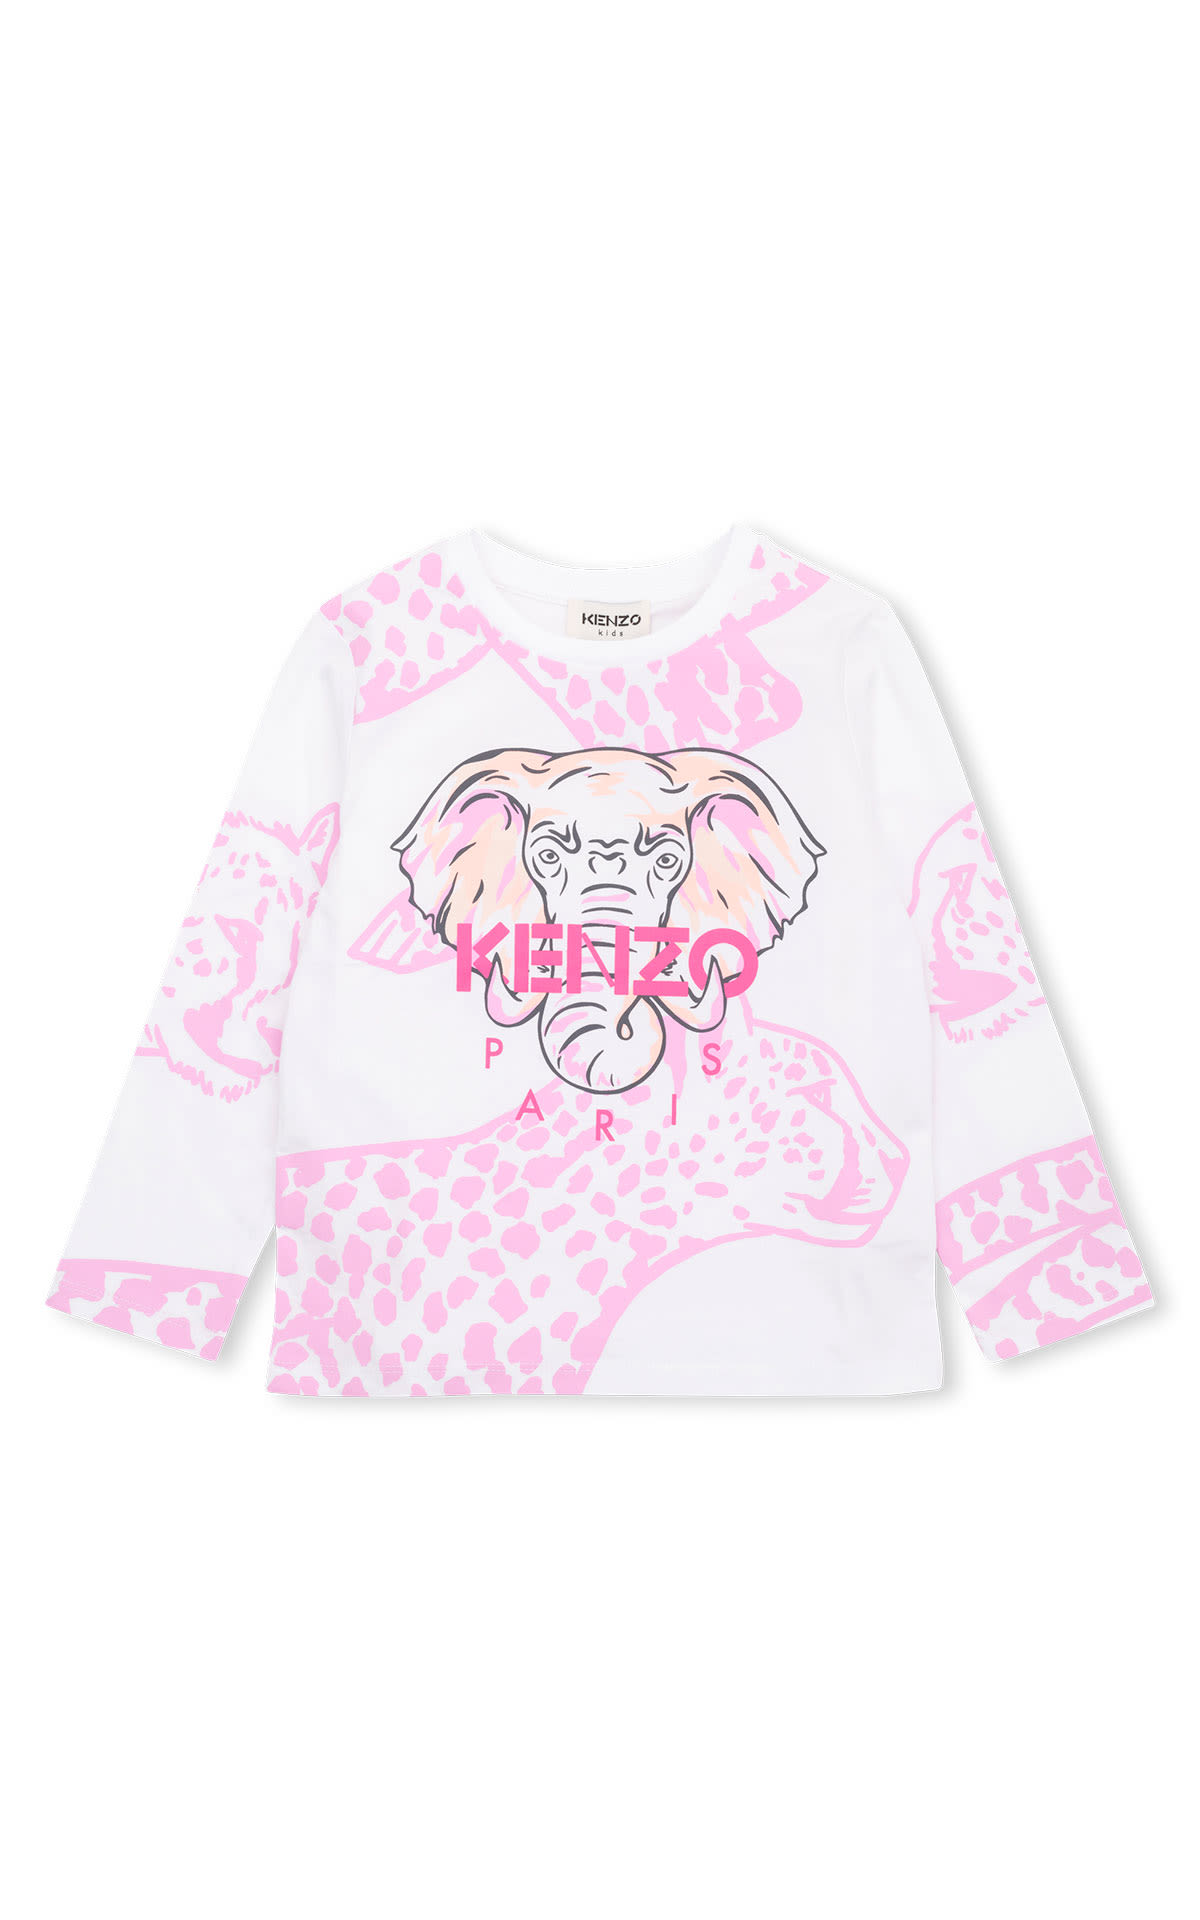 White and pink shirt with elephant embroidery KNEZO KIds around